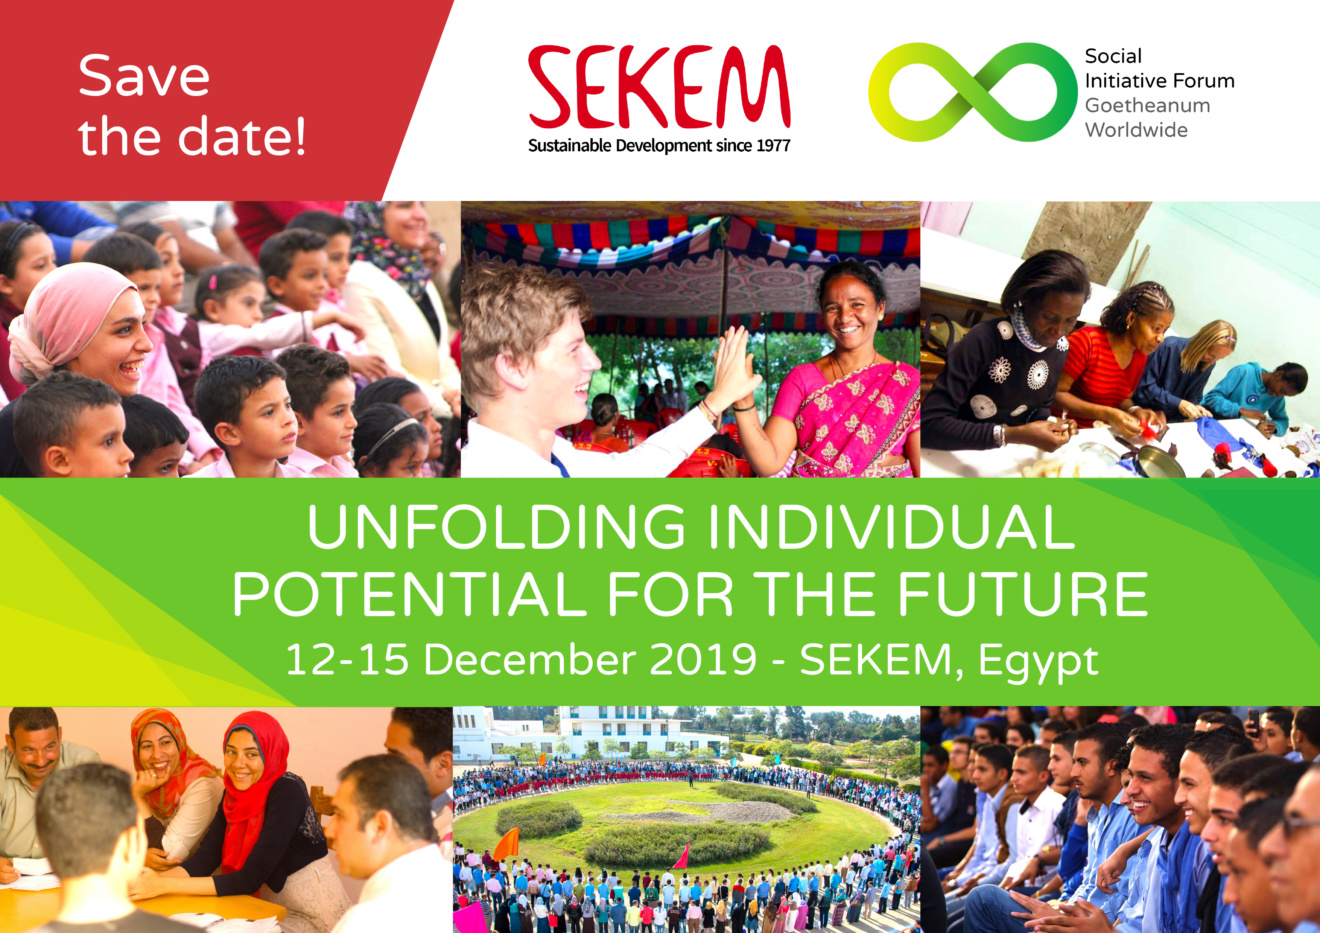 Social Initiative Forum: Unfolding Individual Potential for the Future